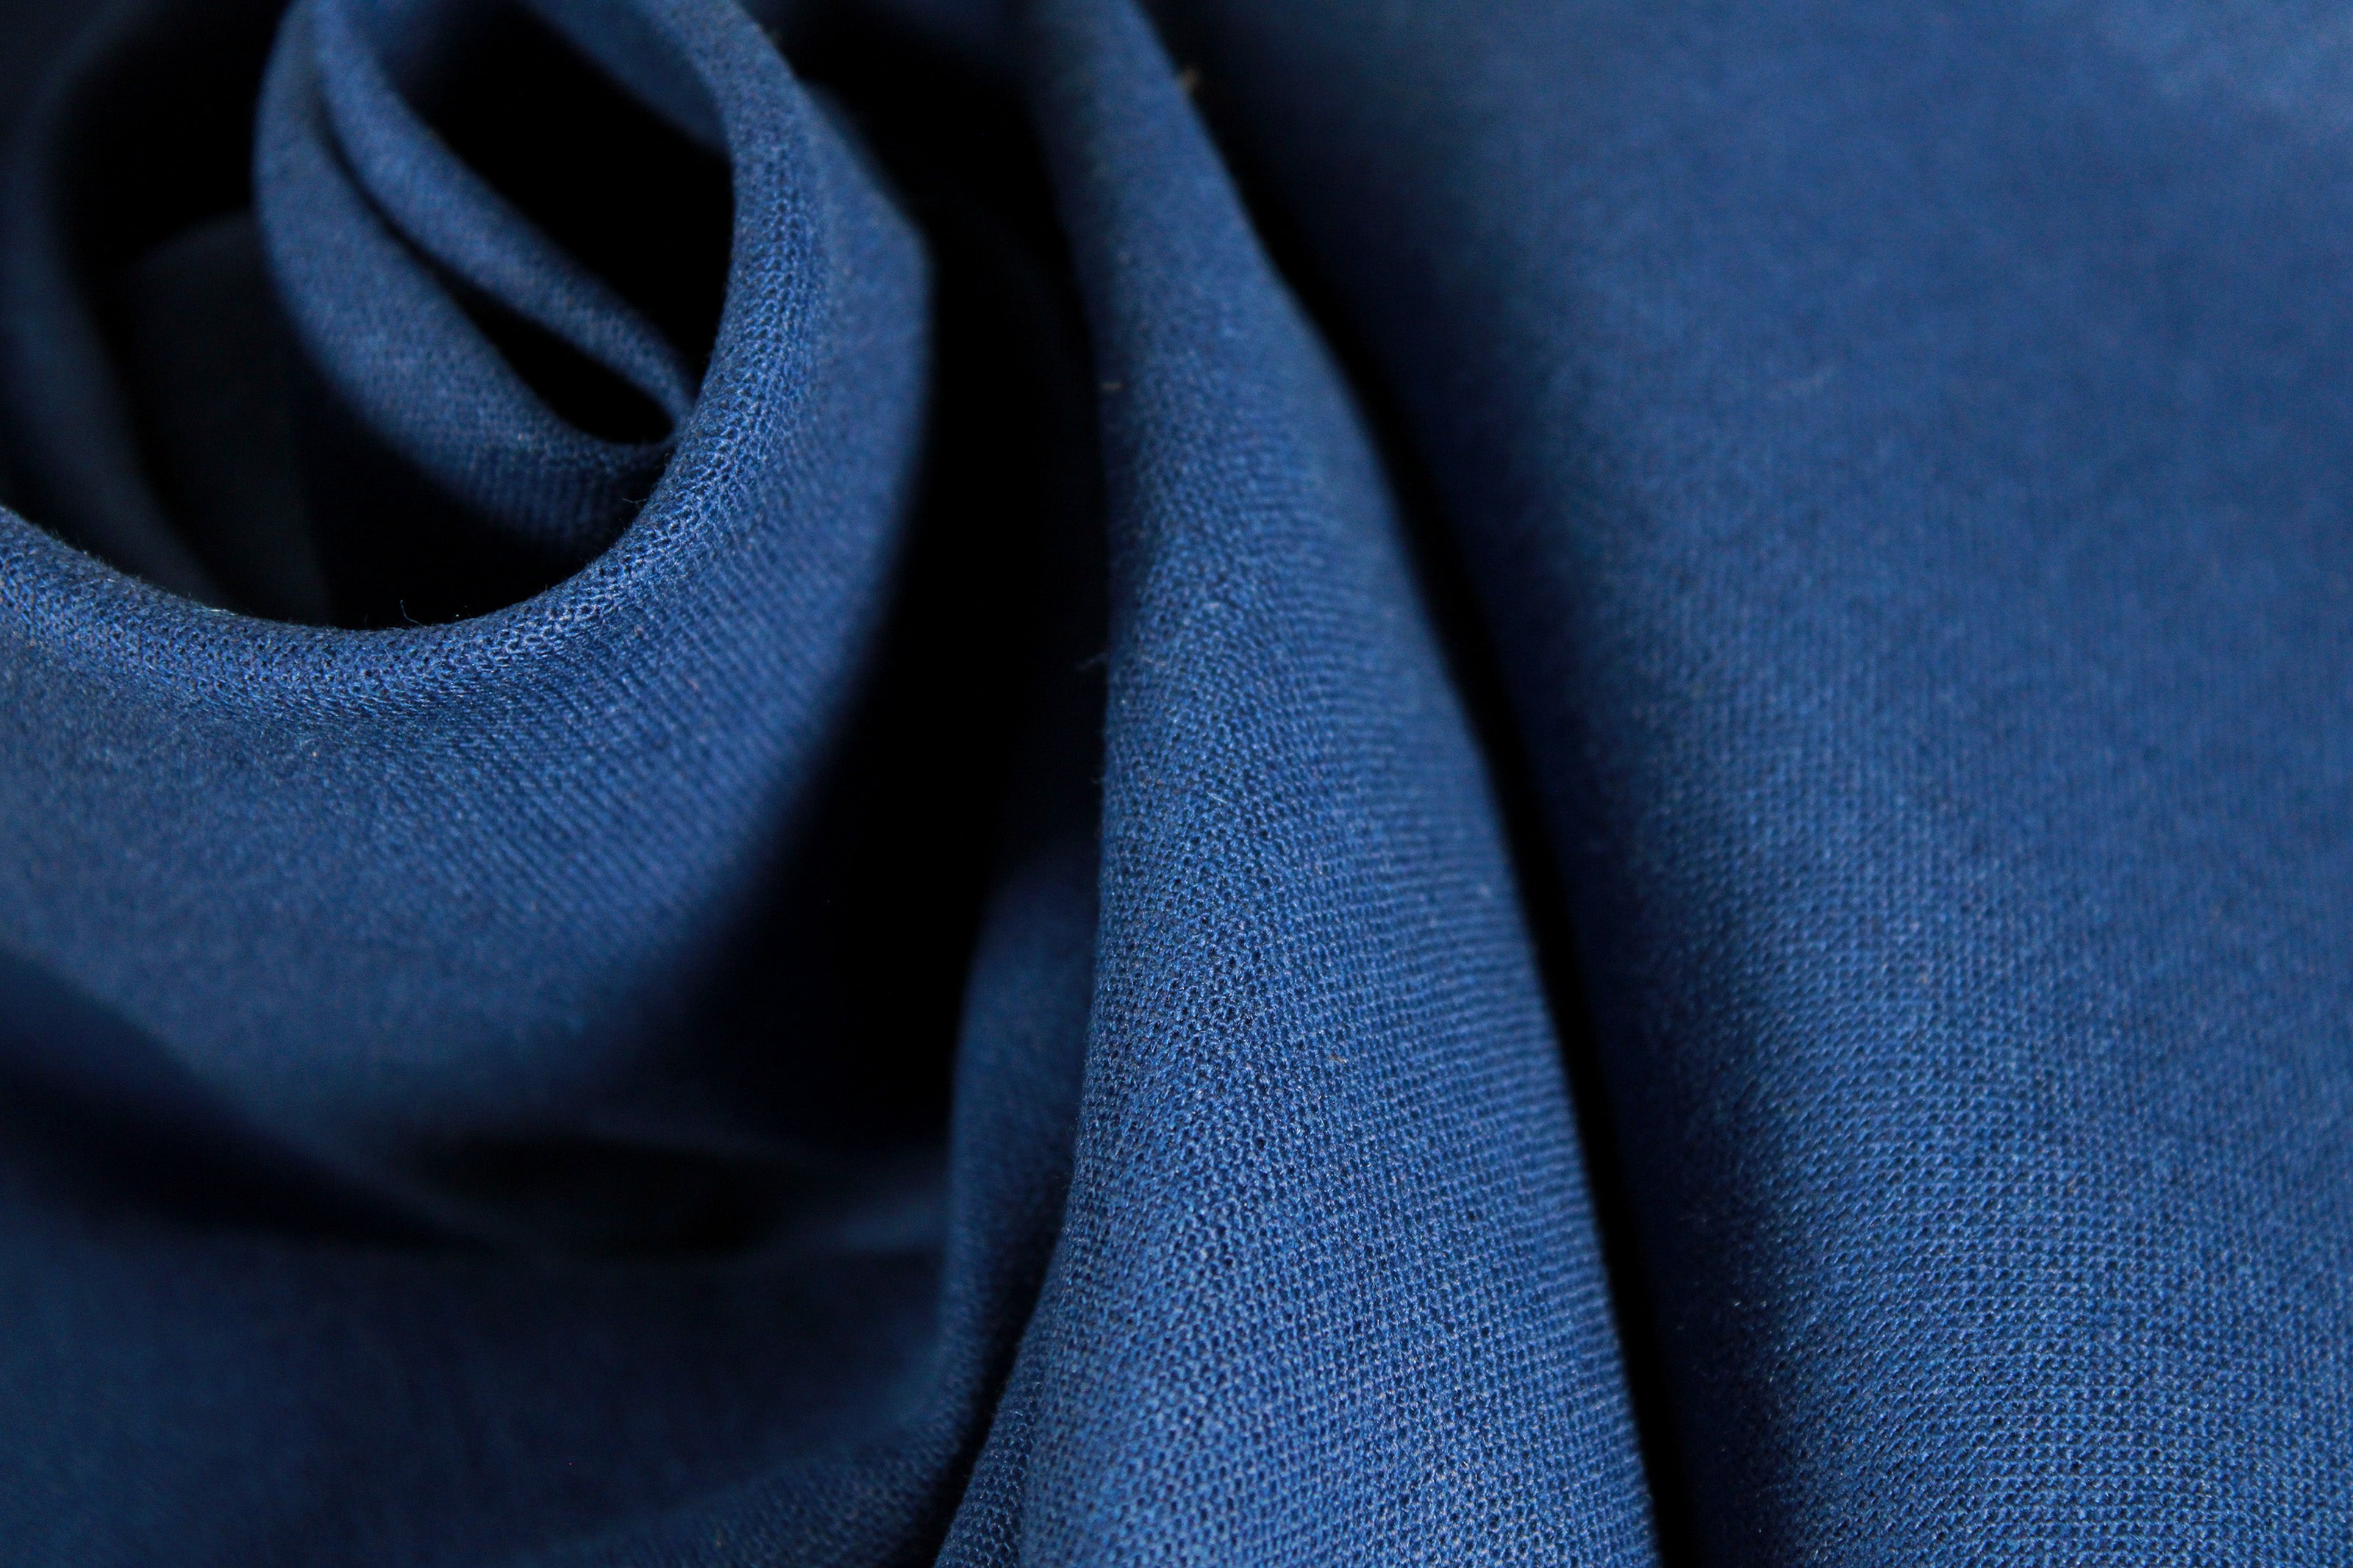 NEW LINEN FABRIC COLLECTION!!! / 100% Linen Fabric by the Yard / Bellwether blue Linen Fabric / Buy Linen Online